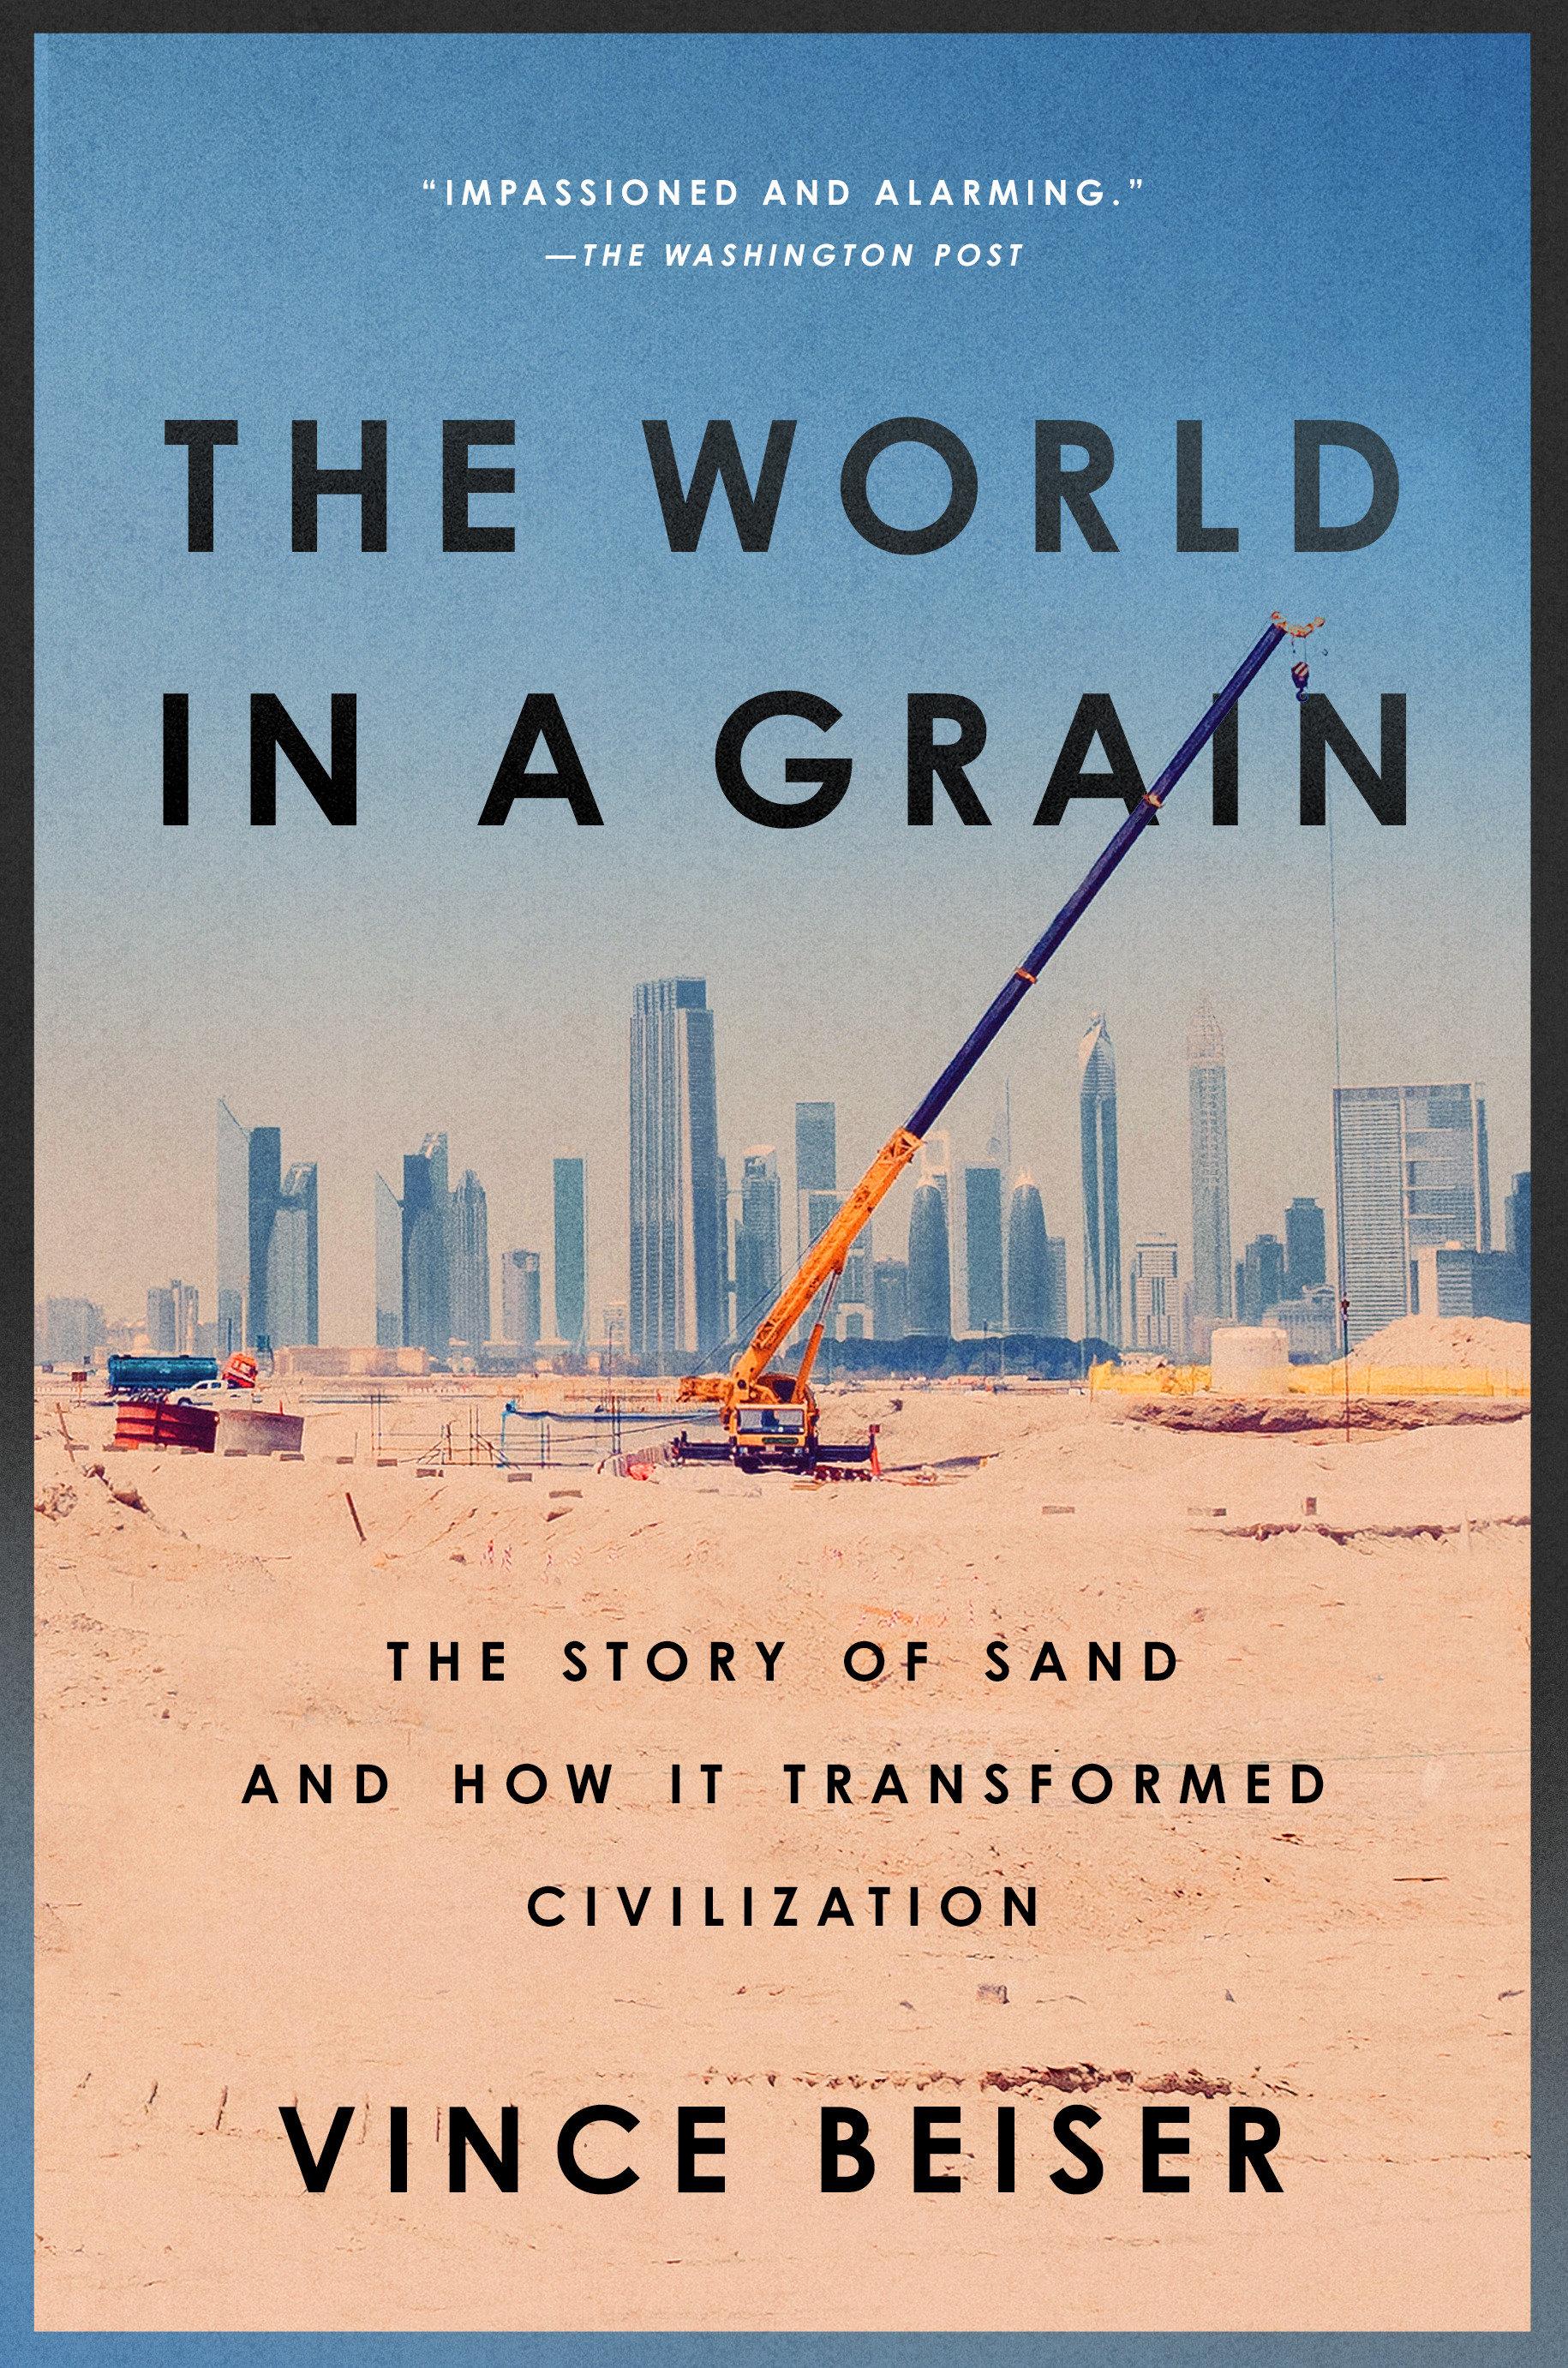 The World in a Grain: The Story of Sand and How It Transformed Civilization / Vince Beiser / Taschenbuch / Einband - flex.(Paperback) / Englisch / 2019 / Penguin Publishing Group / EAN 9780399576447 - Beiser, Vince